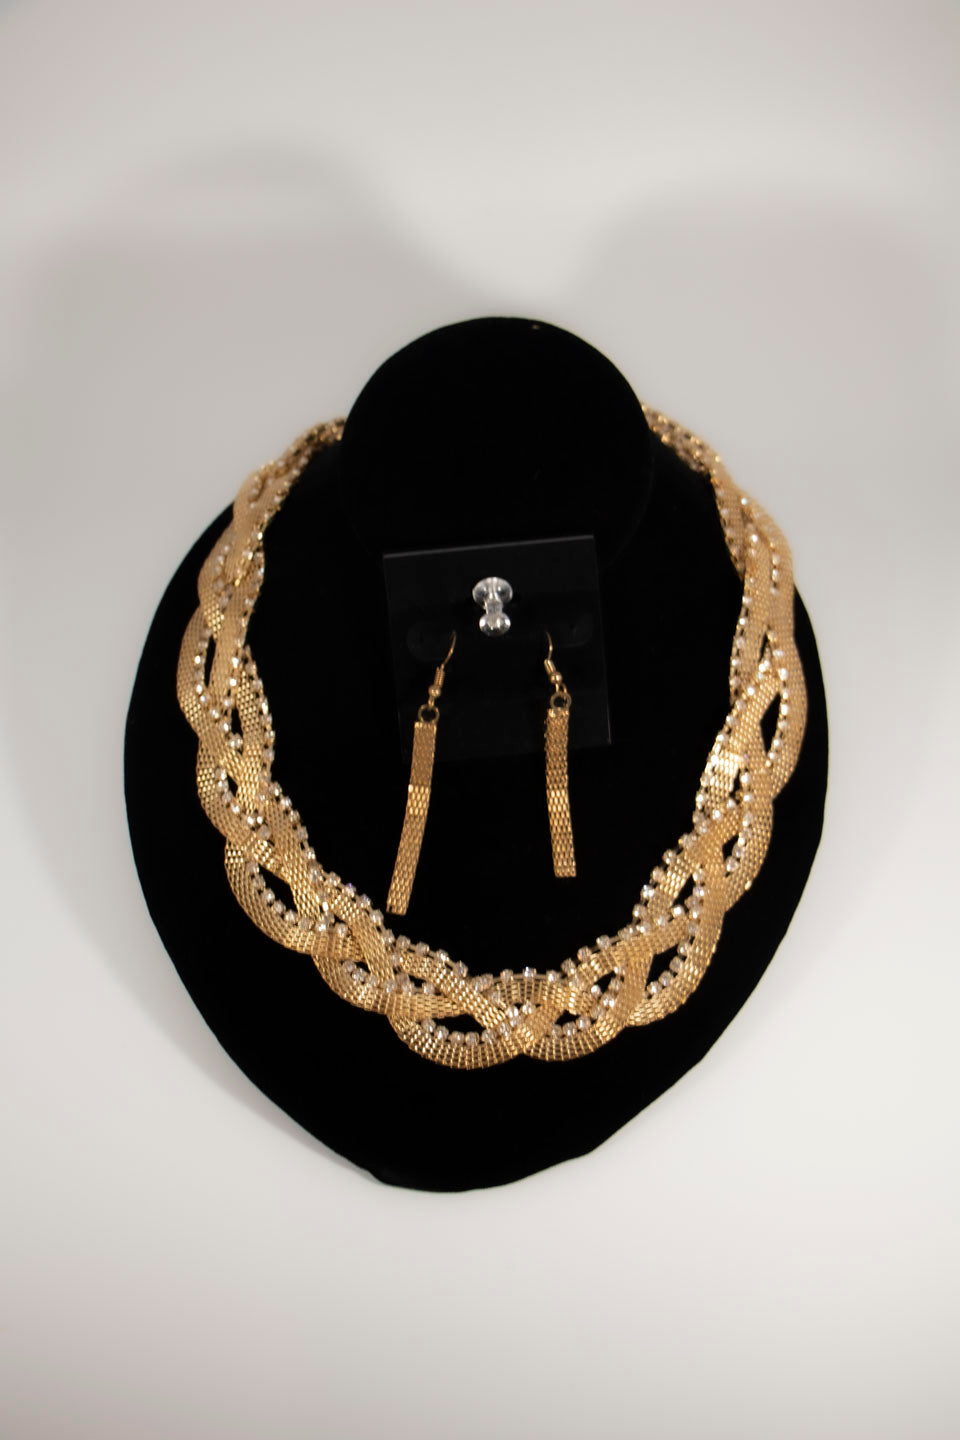 Diamond/Gold Braided High End Necklace and Earrings Set